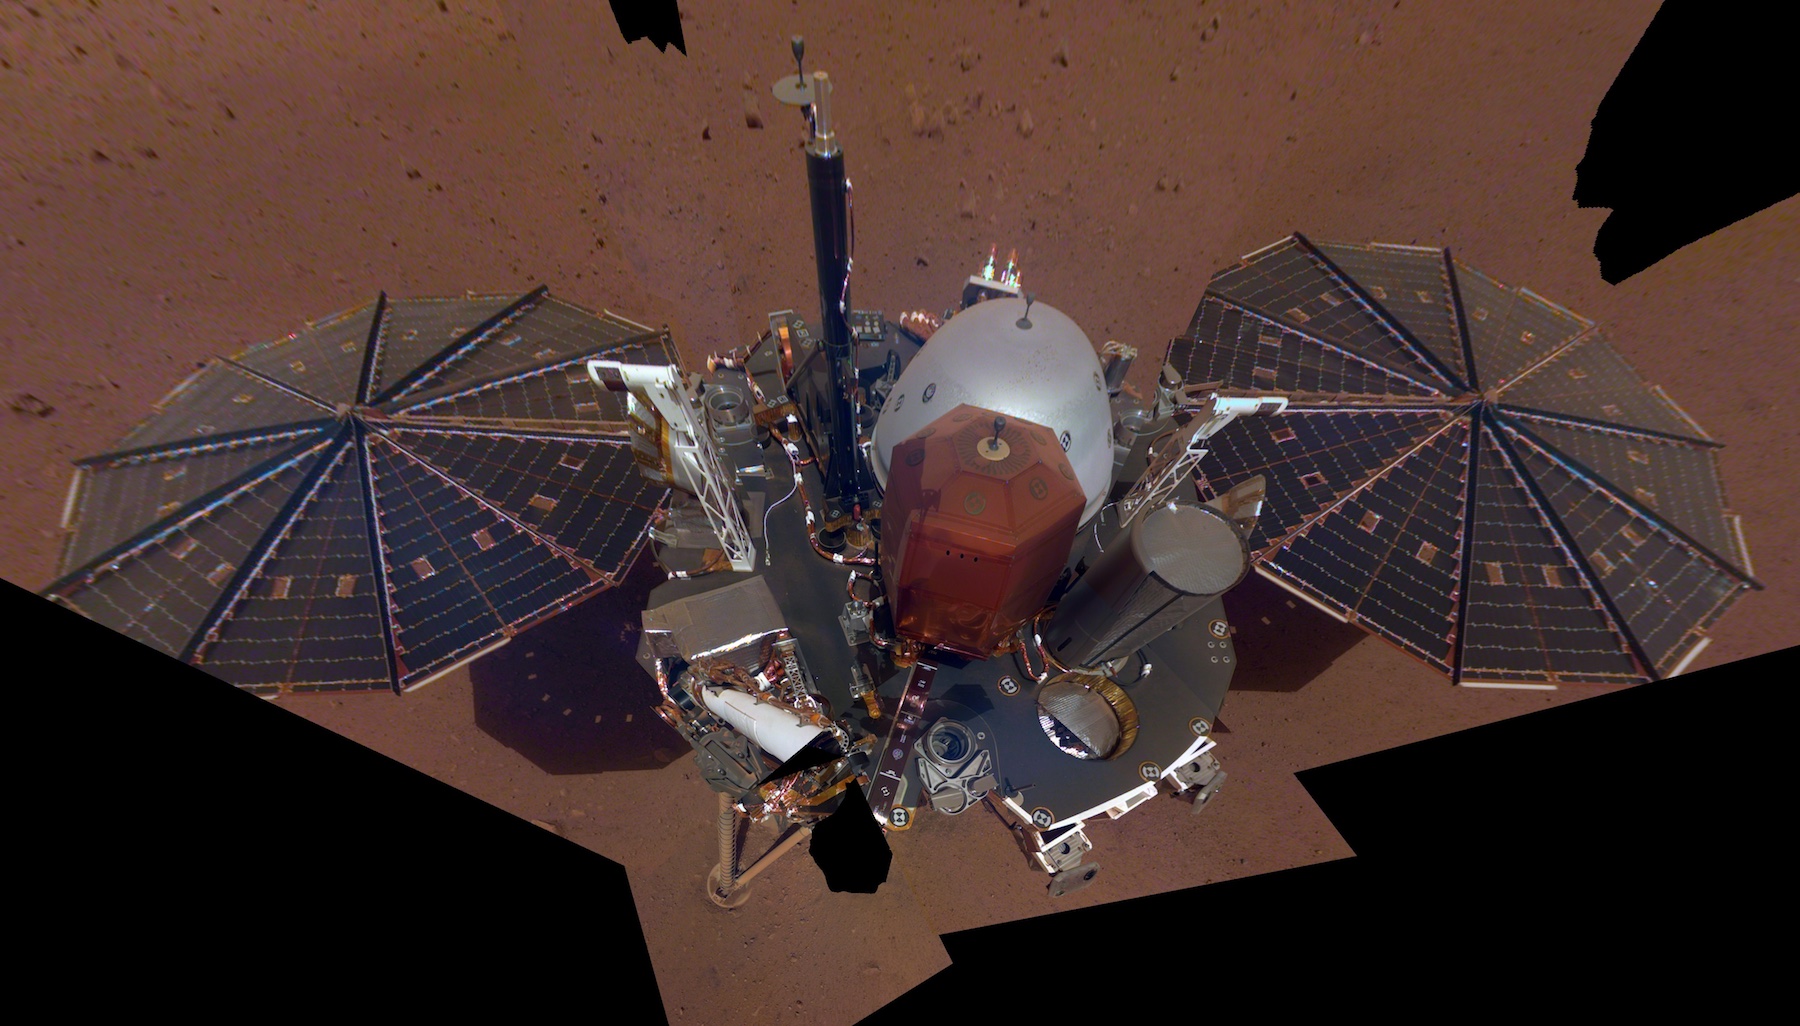 spacecraft on reddish surface seen from above